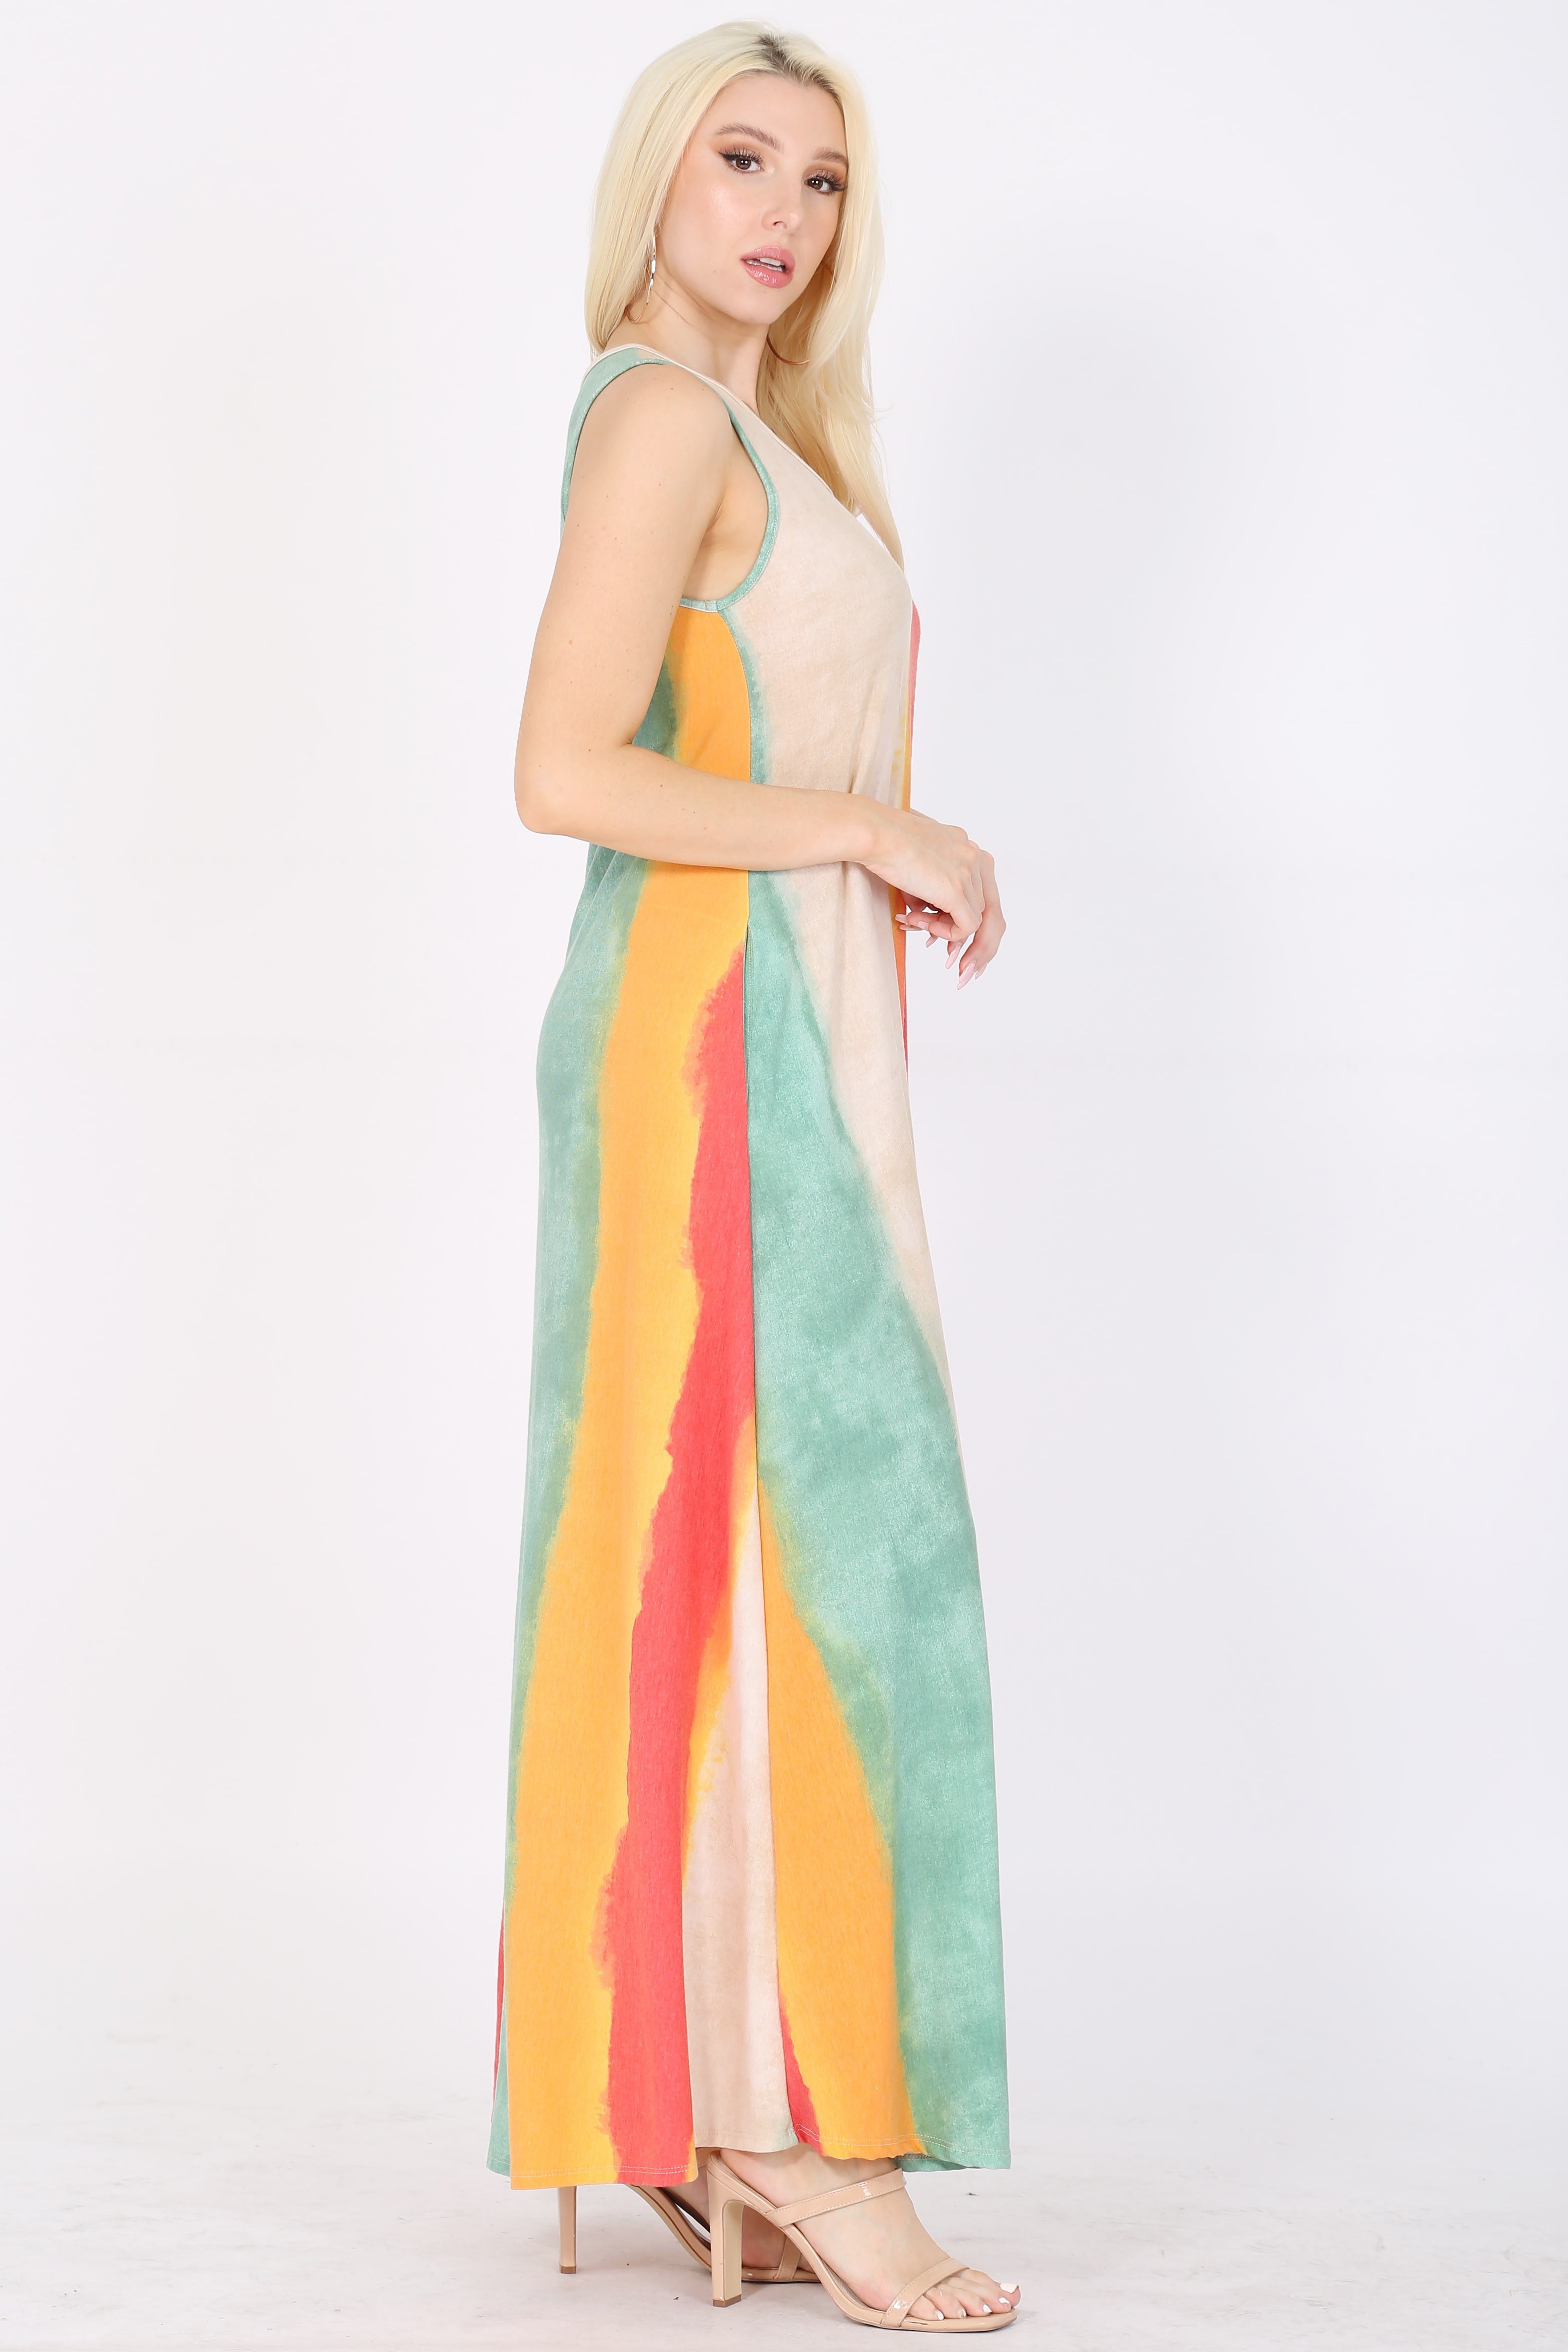 Women's Maxi Dress line A sleeveless and pockets on the sides